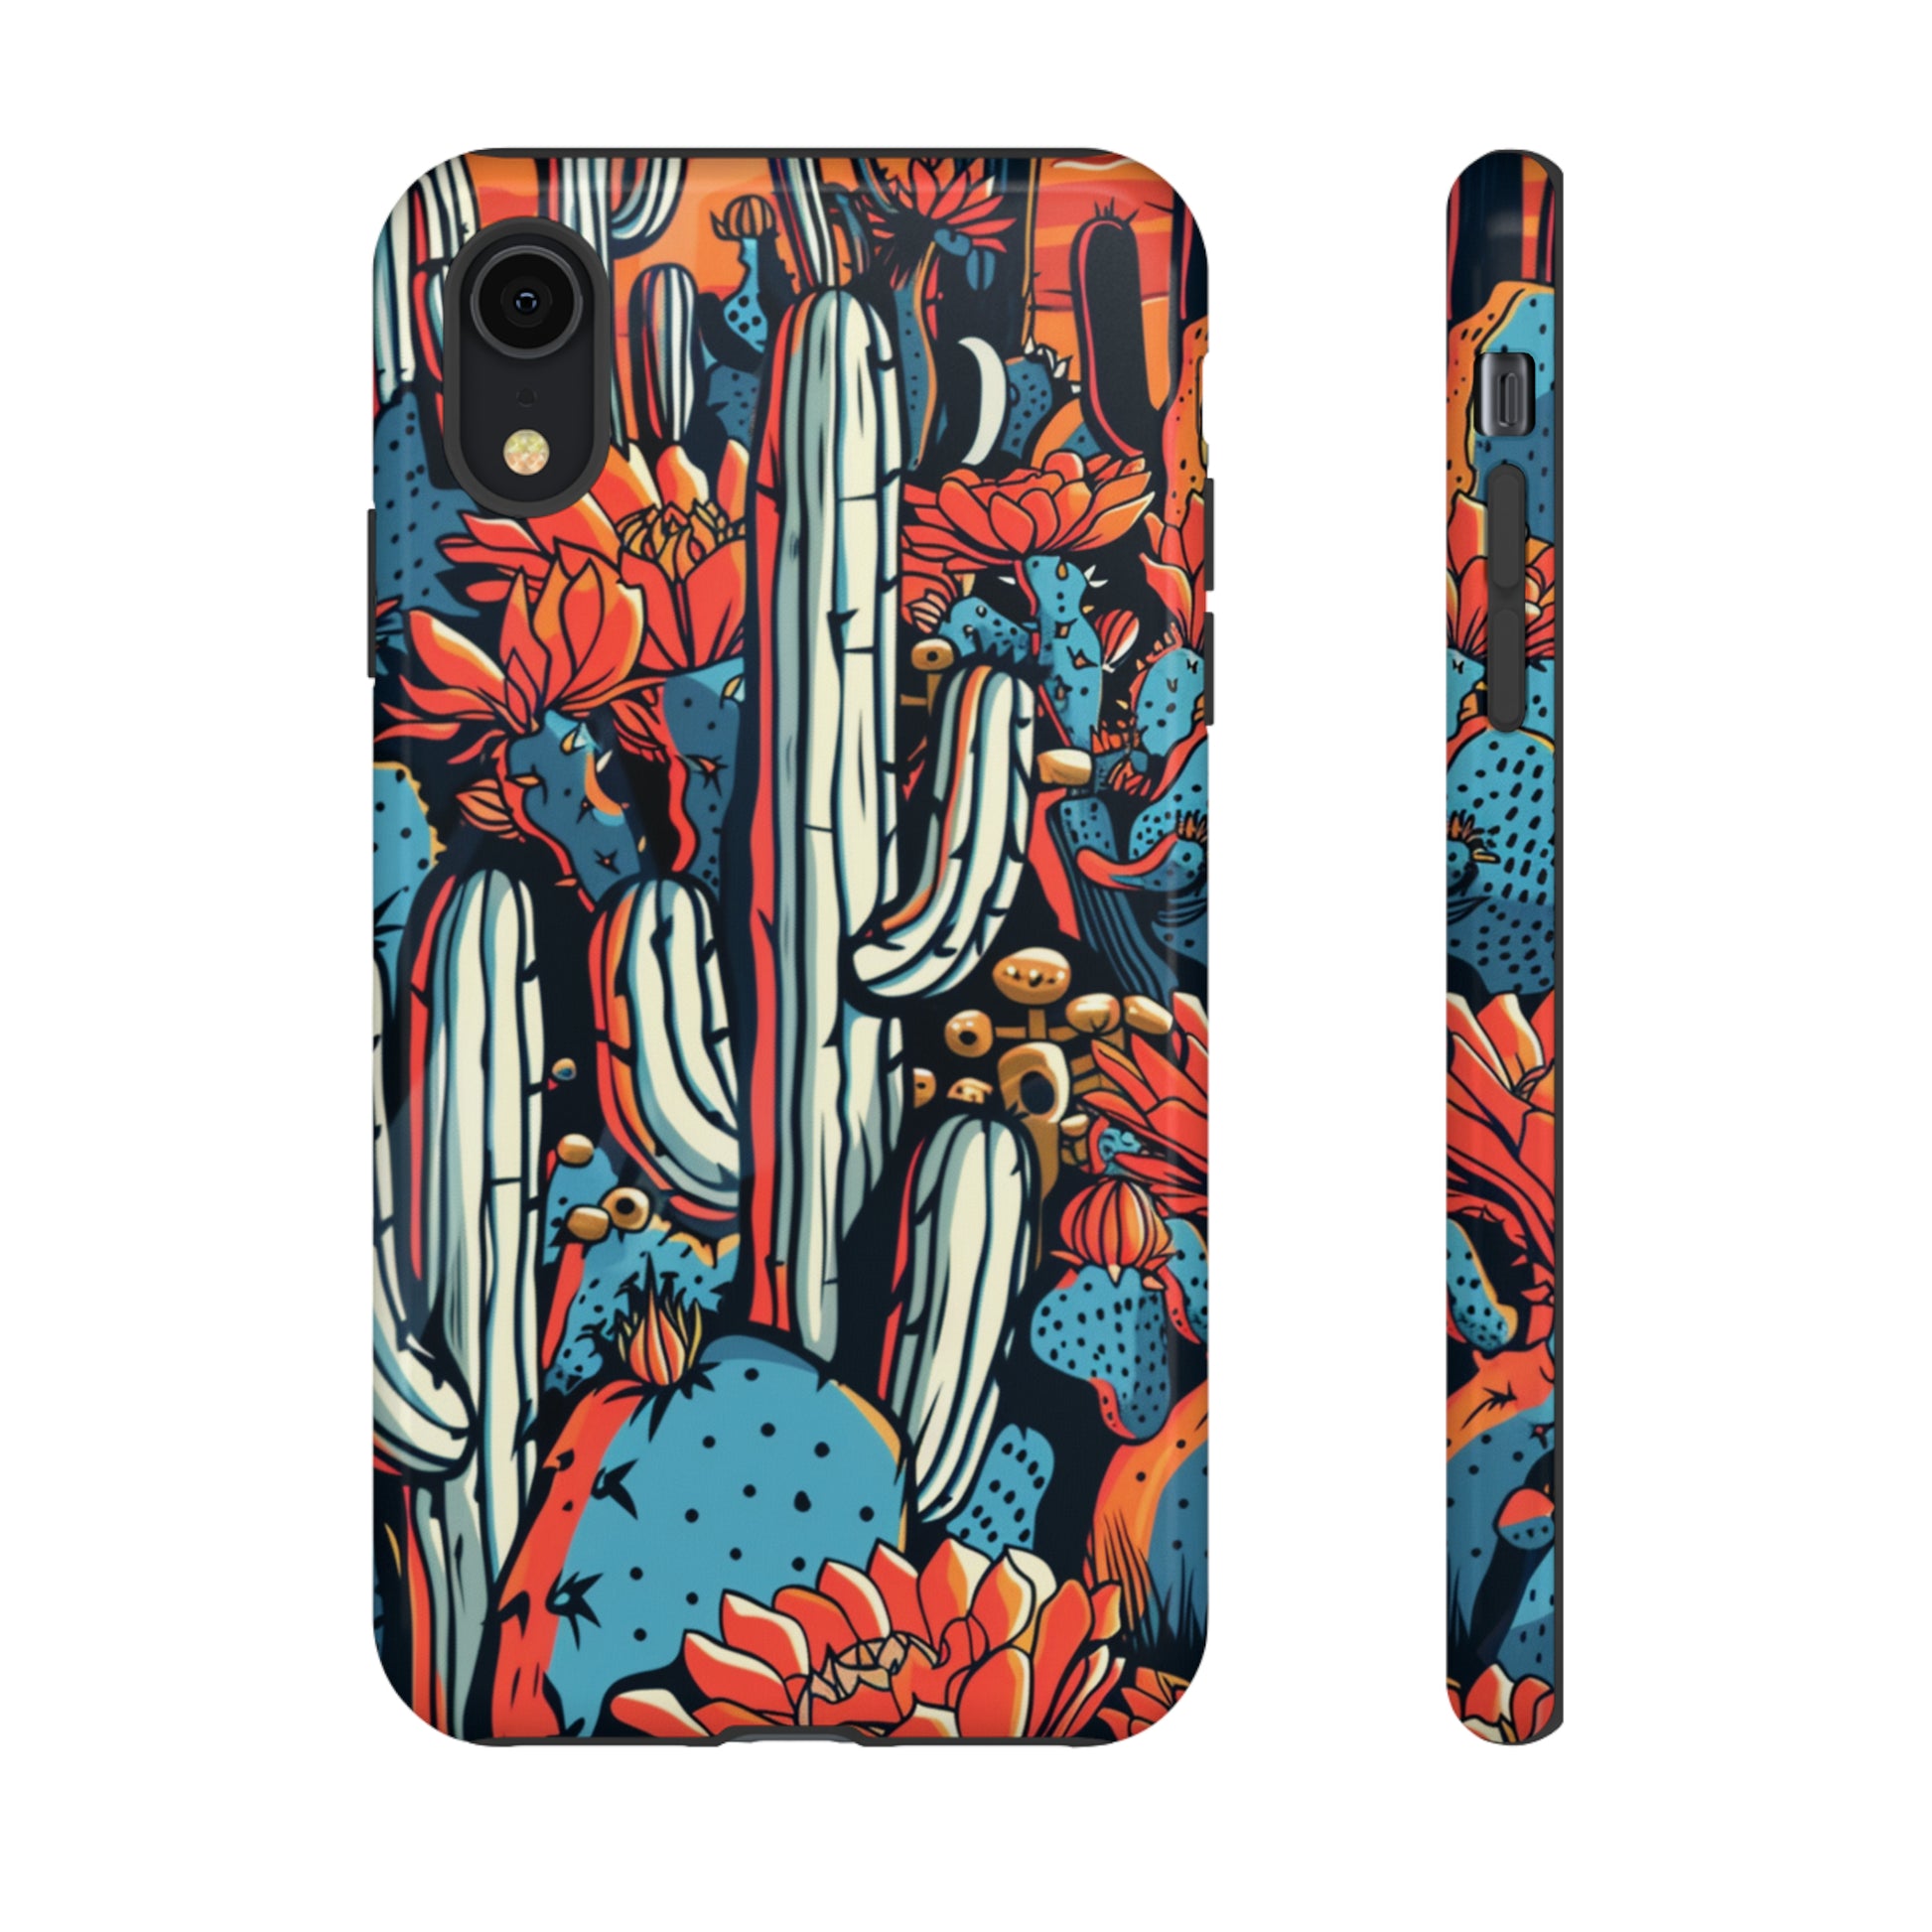 Groovy Psychedelic Art Phone Case